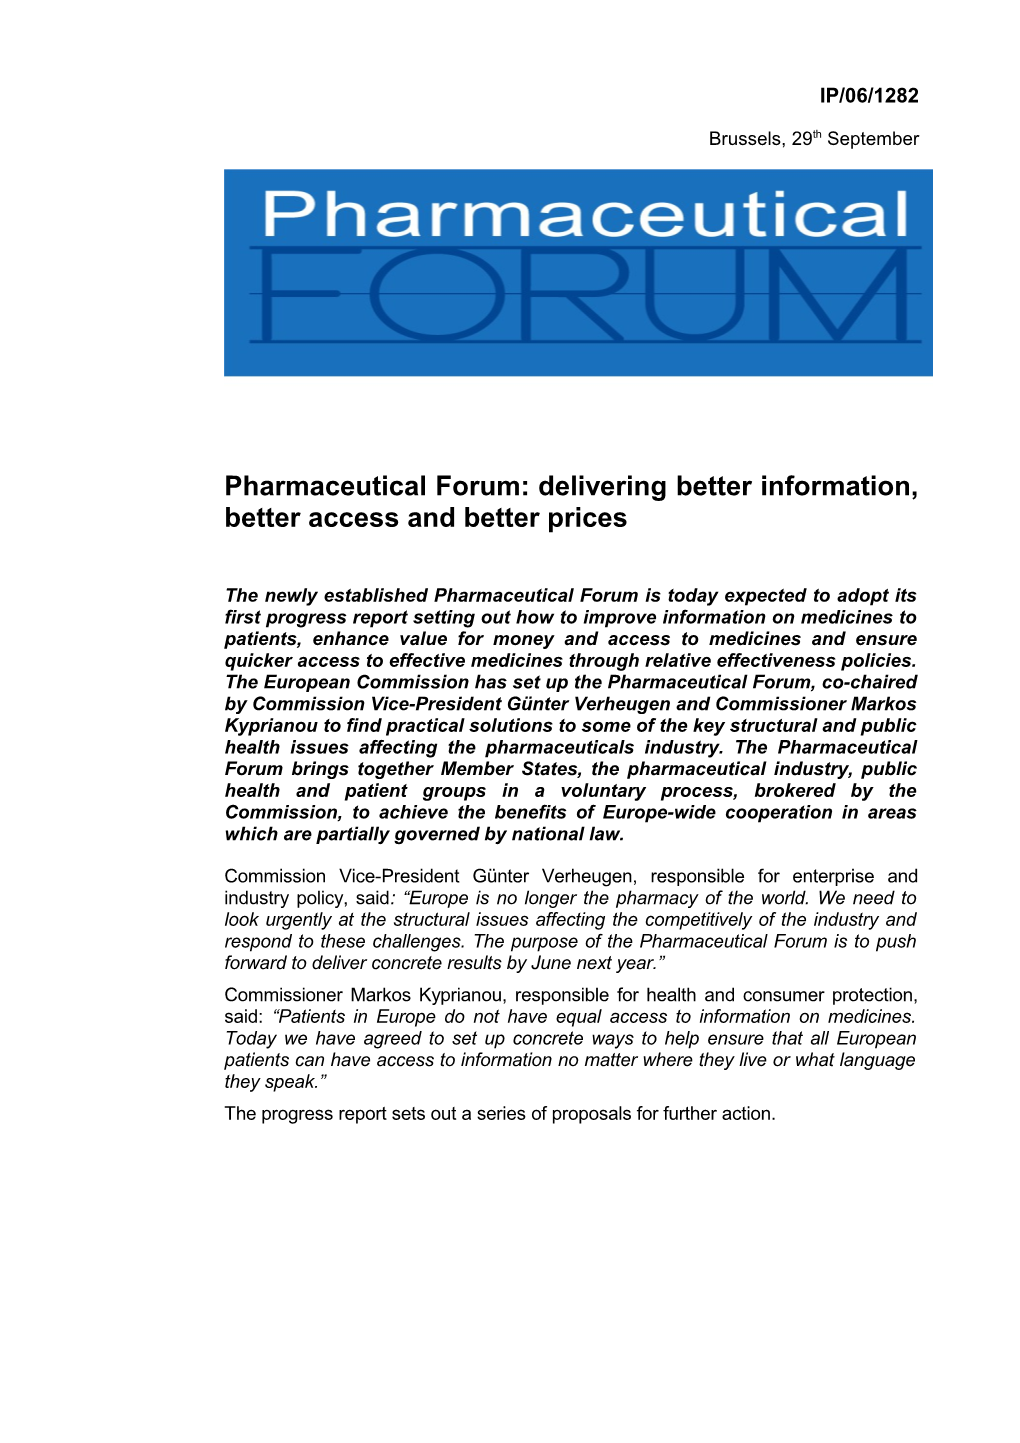 Pharmaceutical Forum: Delivering Better Information, Better Access and Better Prices